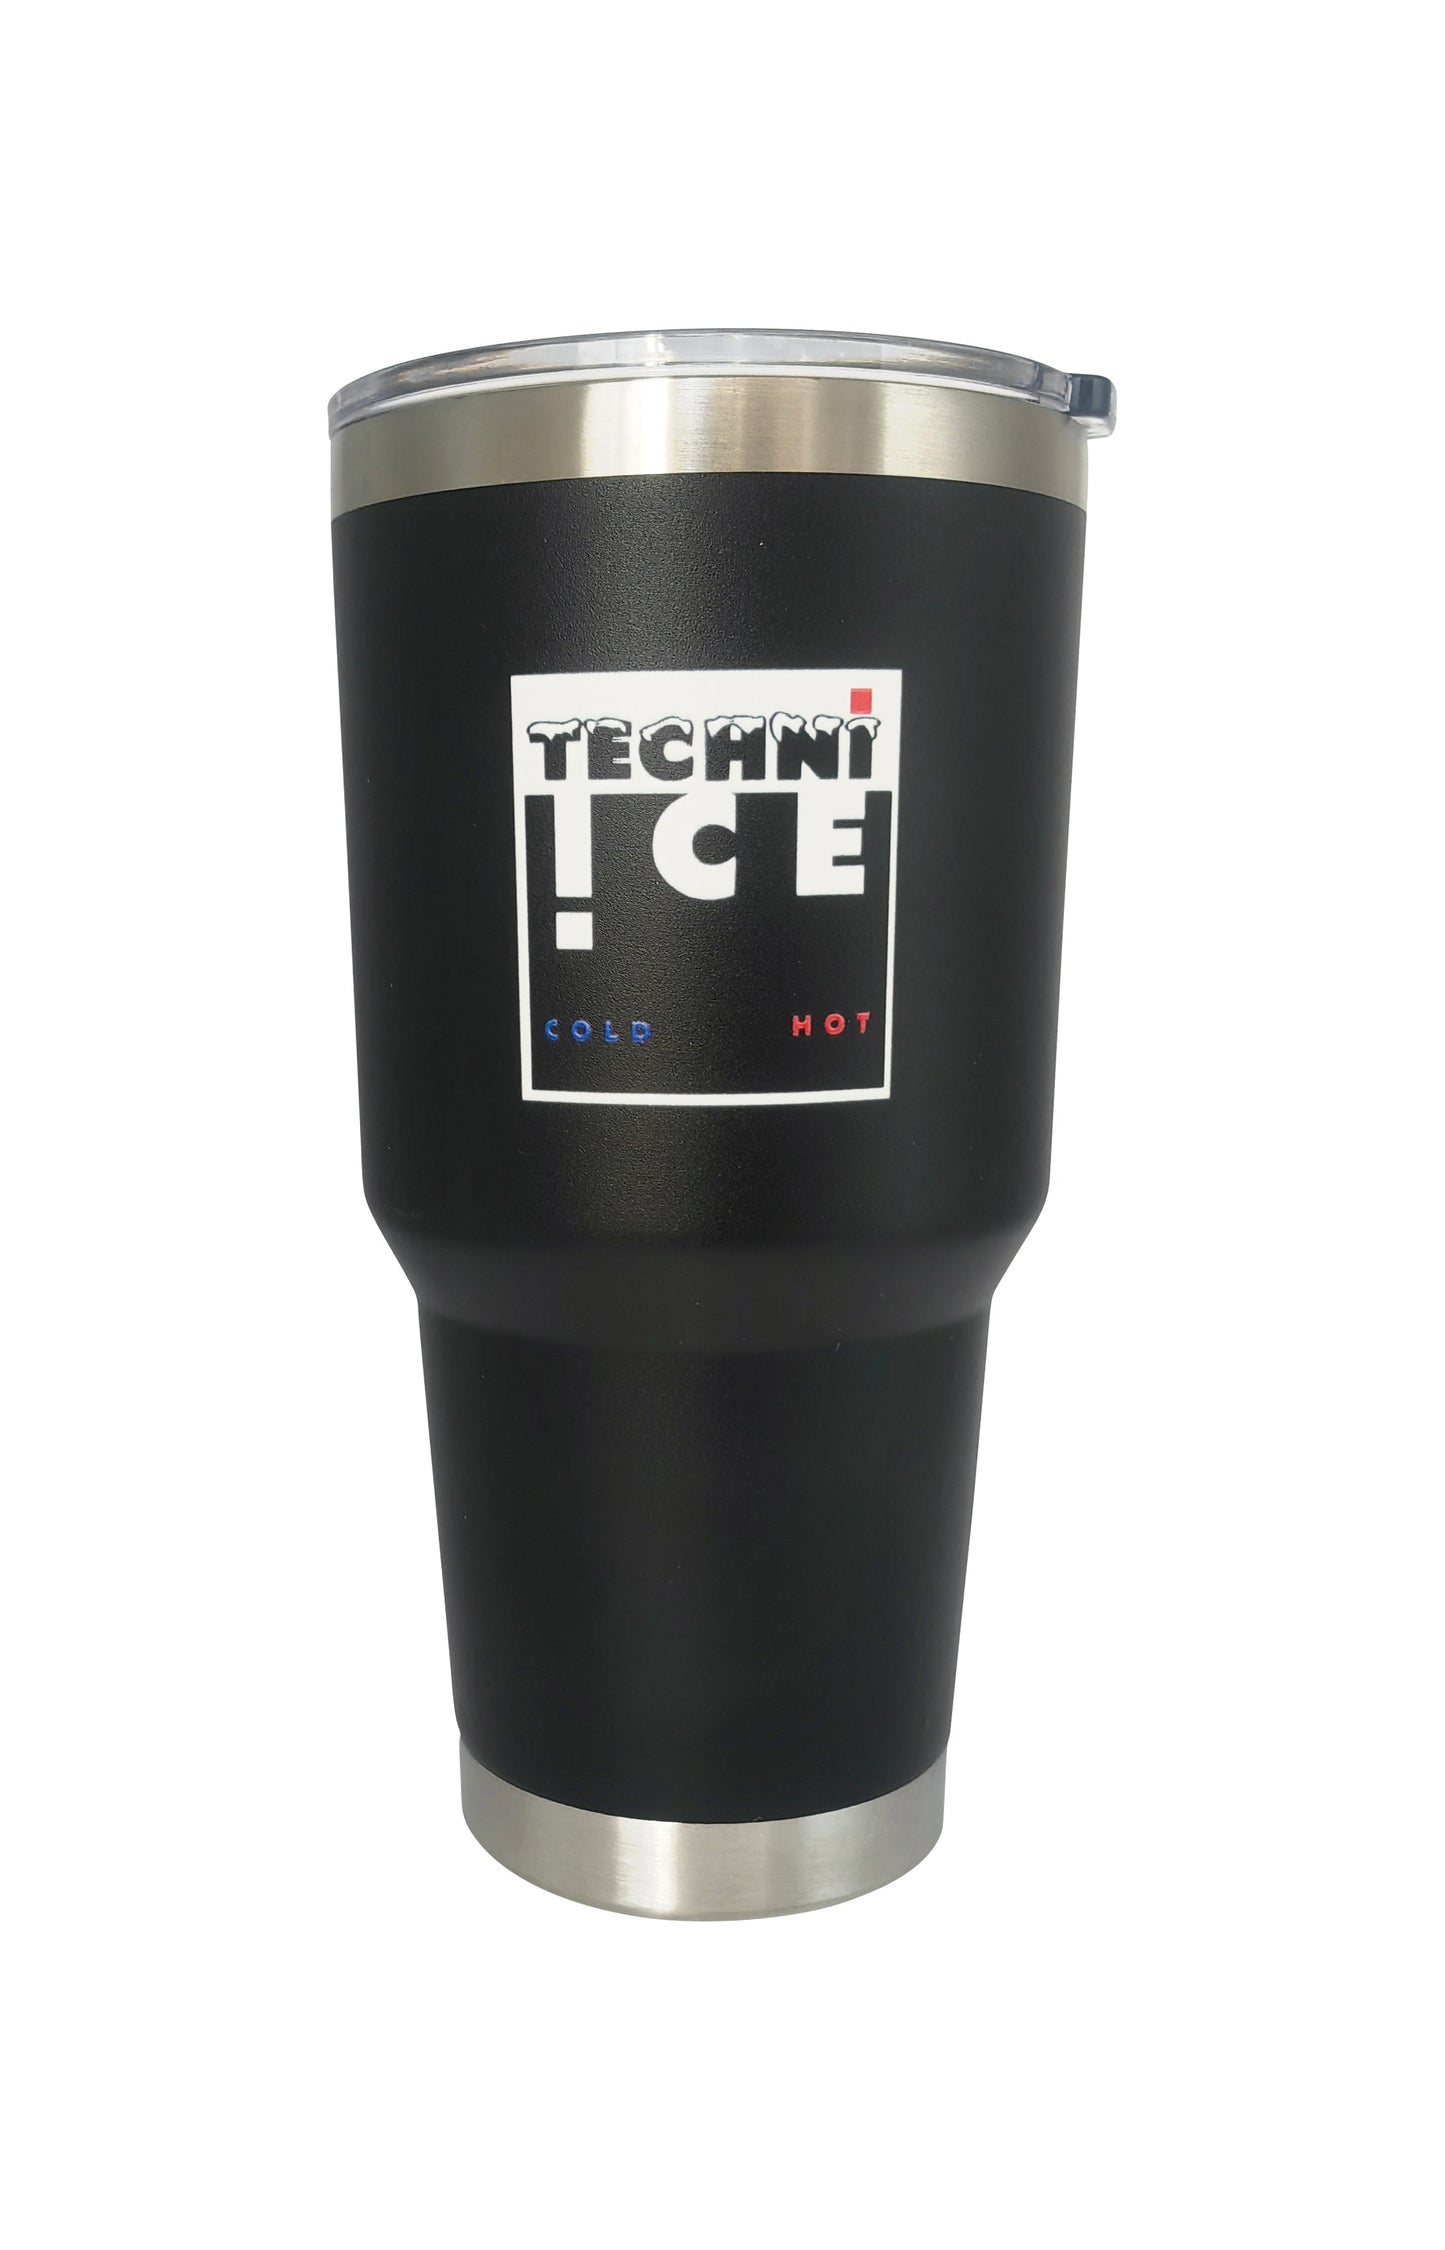 13L High Performance Cooler Bag + 2 x 900ml / 30oz. Stainless Steel Thermal Tumbler + 6 Reusable Dry Ice Packs Combo